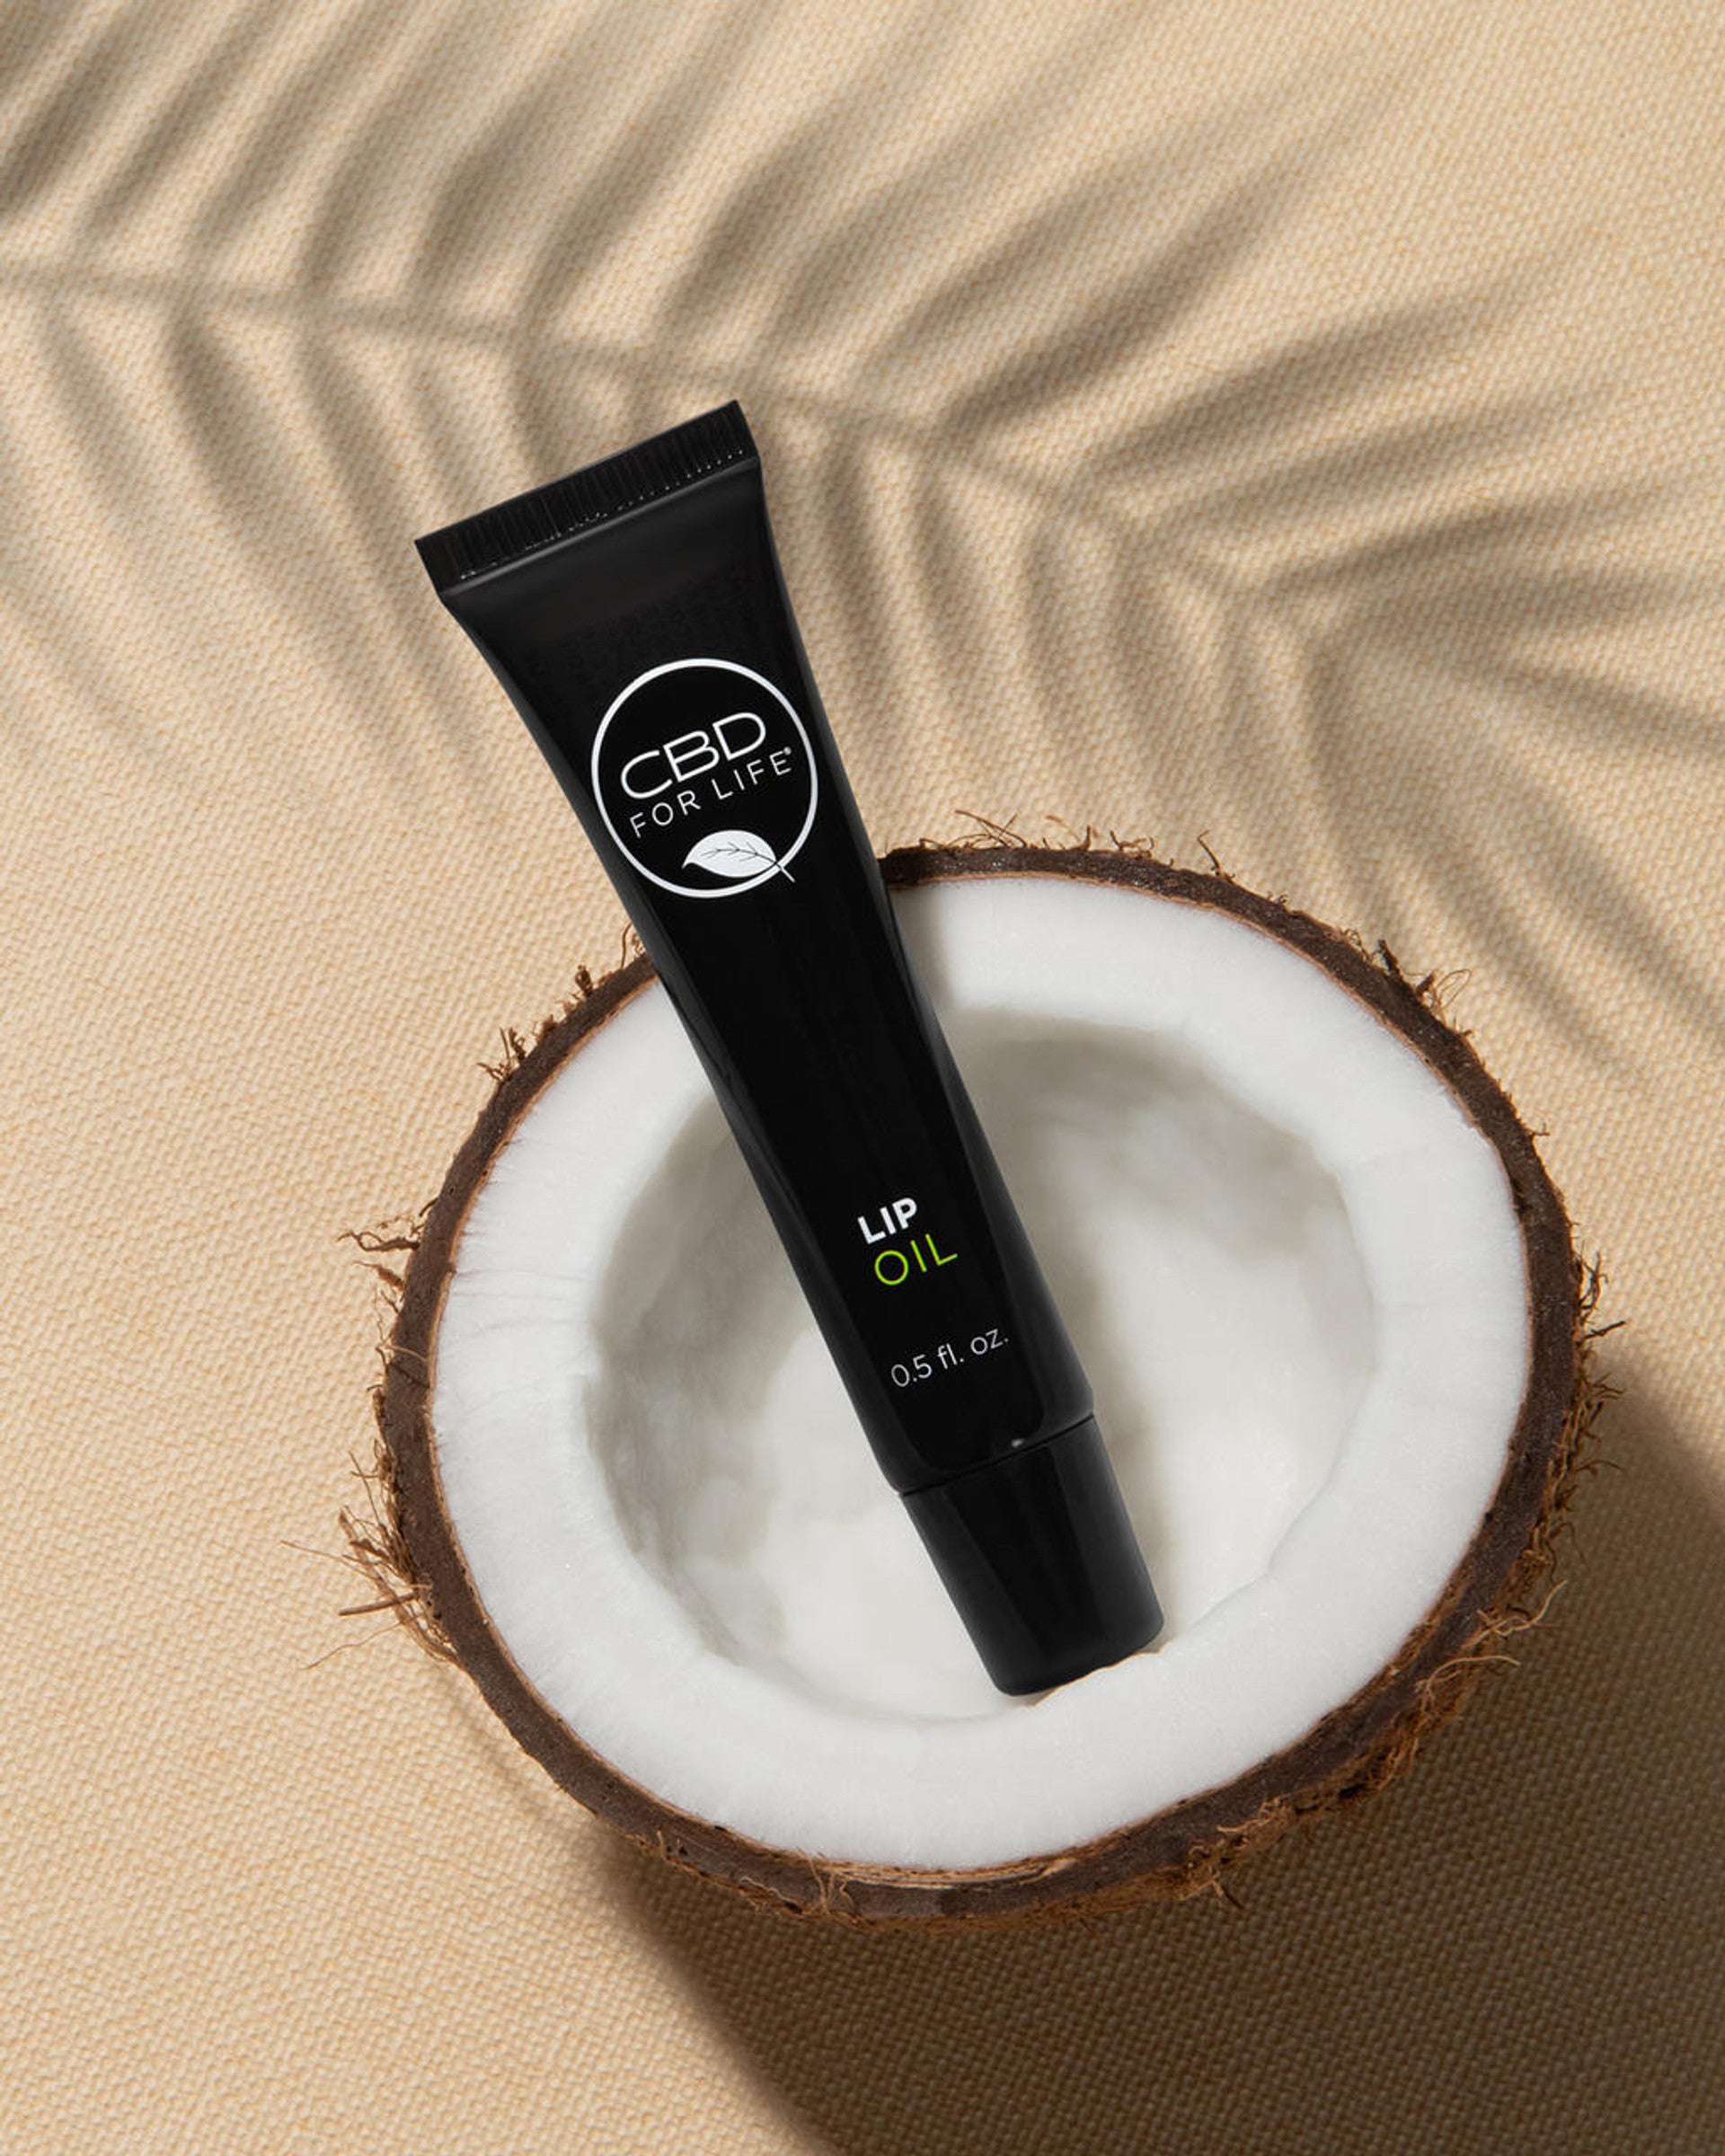 Skin-soothing actives, such as CBD, coconut oil and shea butter, help to improve the overall condition of the lips—soothing, softening and sealing in moisture